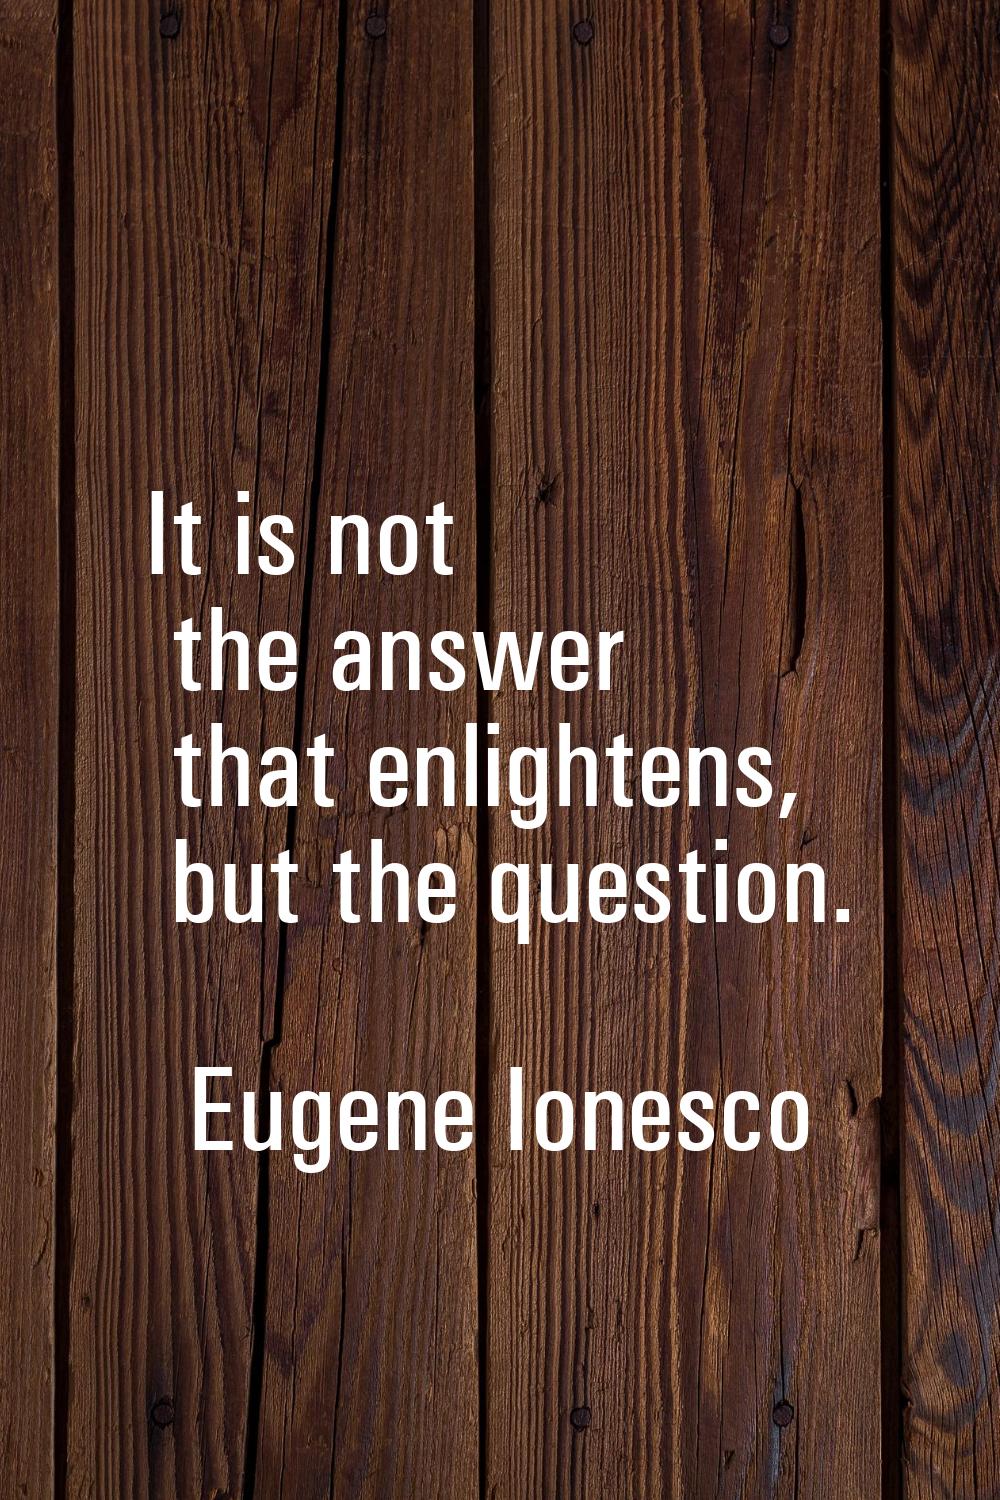 It is not the answer that enlightens, but the question.